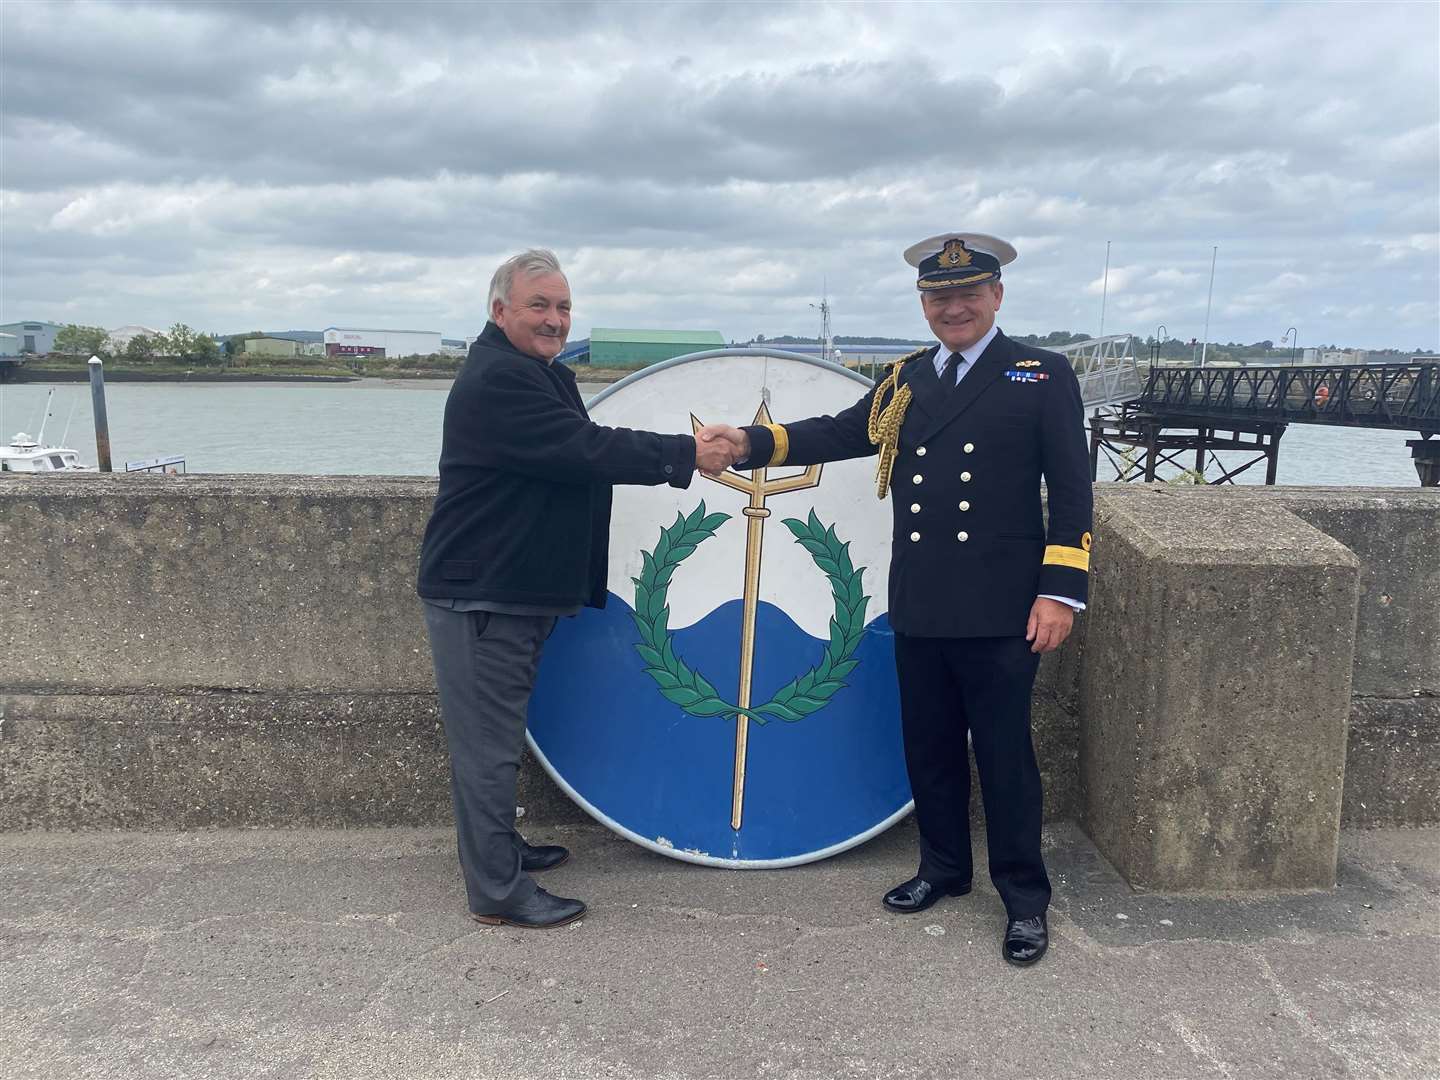 Cdre Rob Bellfield hands over one of the funnel badges from HMS Chatham, which he served on board twice, to Medway Council leader Alan Jarrett. They will be displayed at St George's Centre in Chatham on Tuesdays